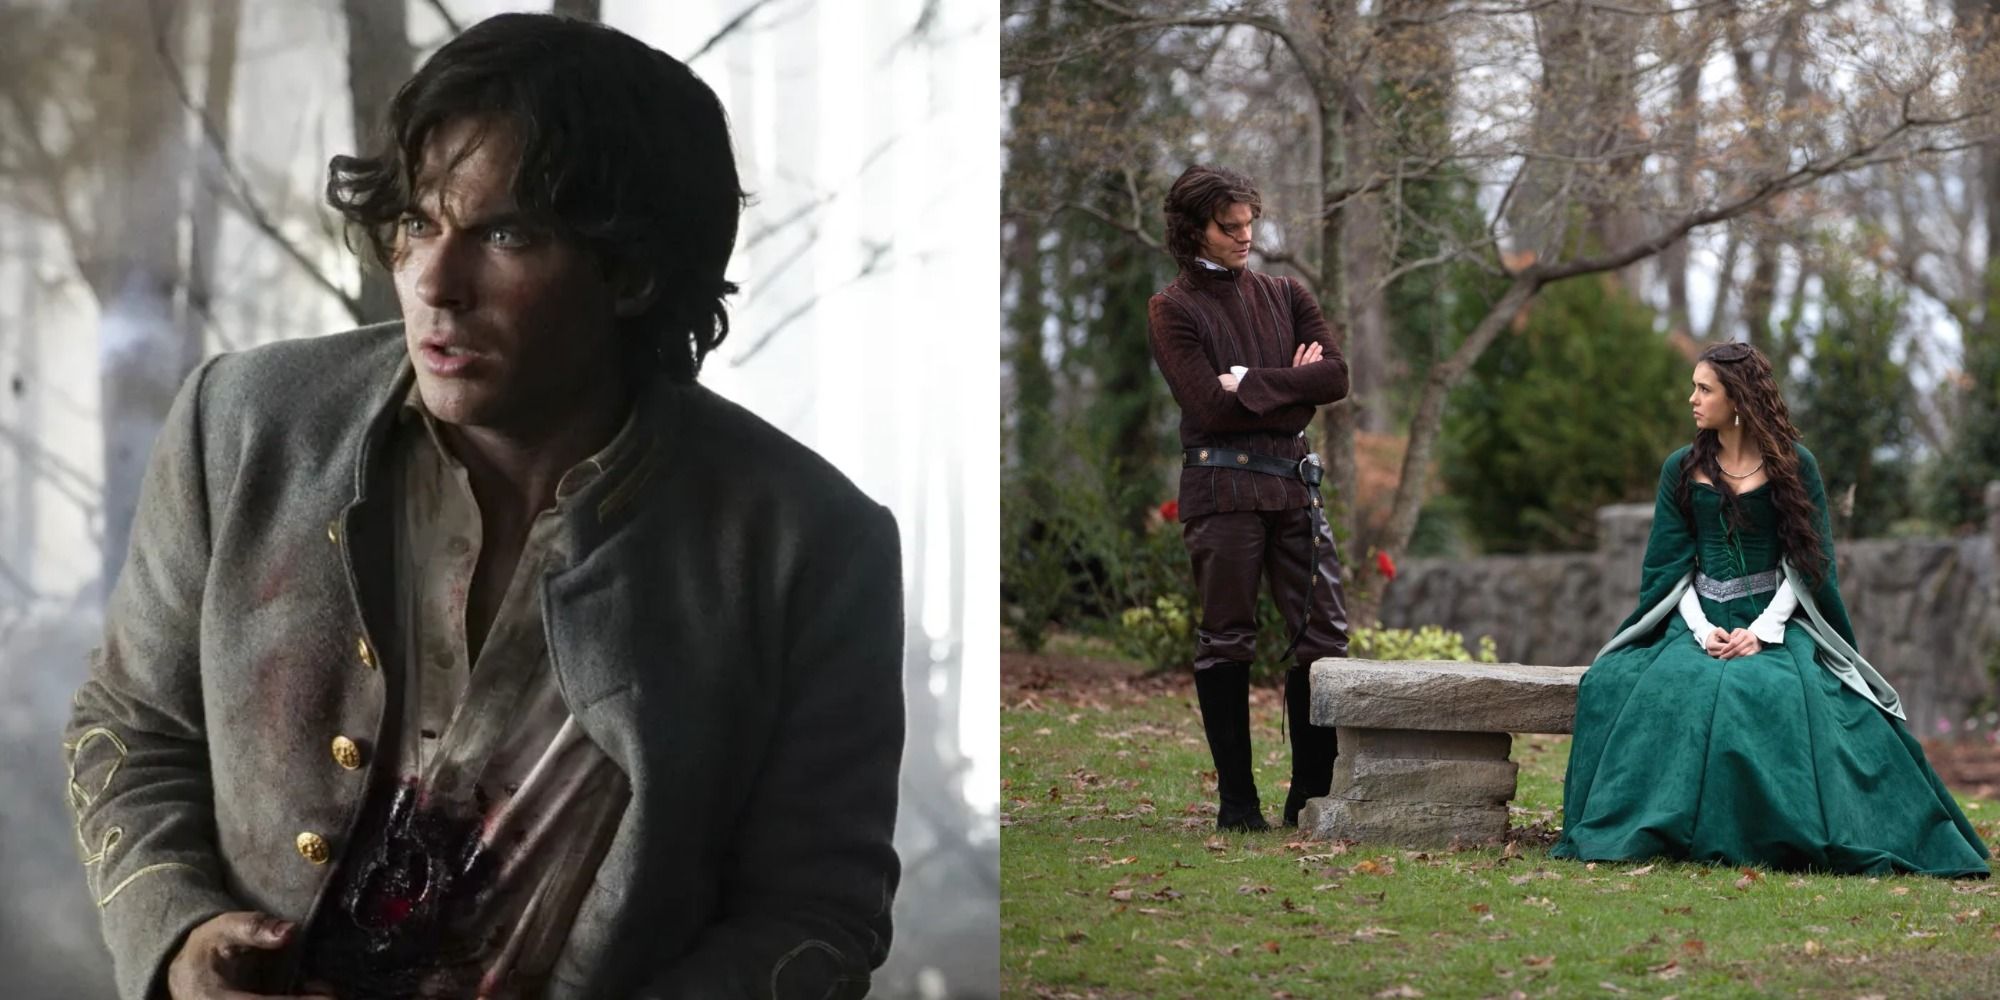 Split image showing Damon during tre Civil War and Katherine during the Renaissance in The Vampire Diaries.